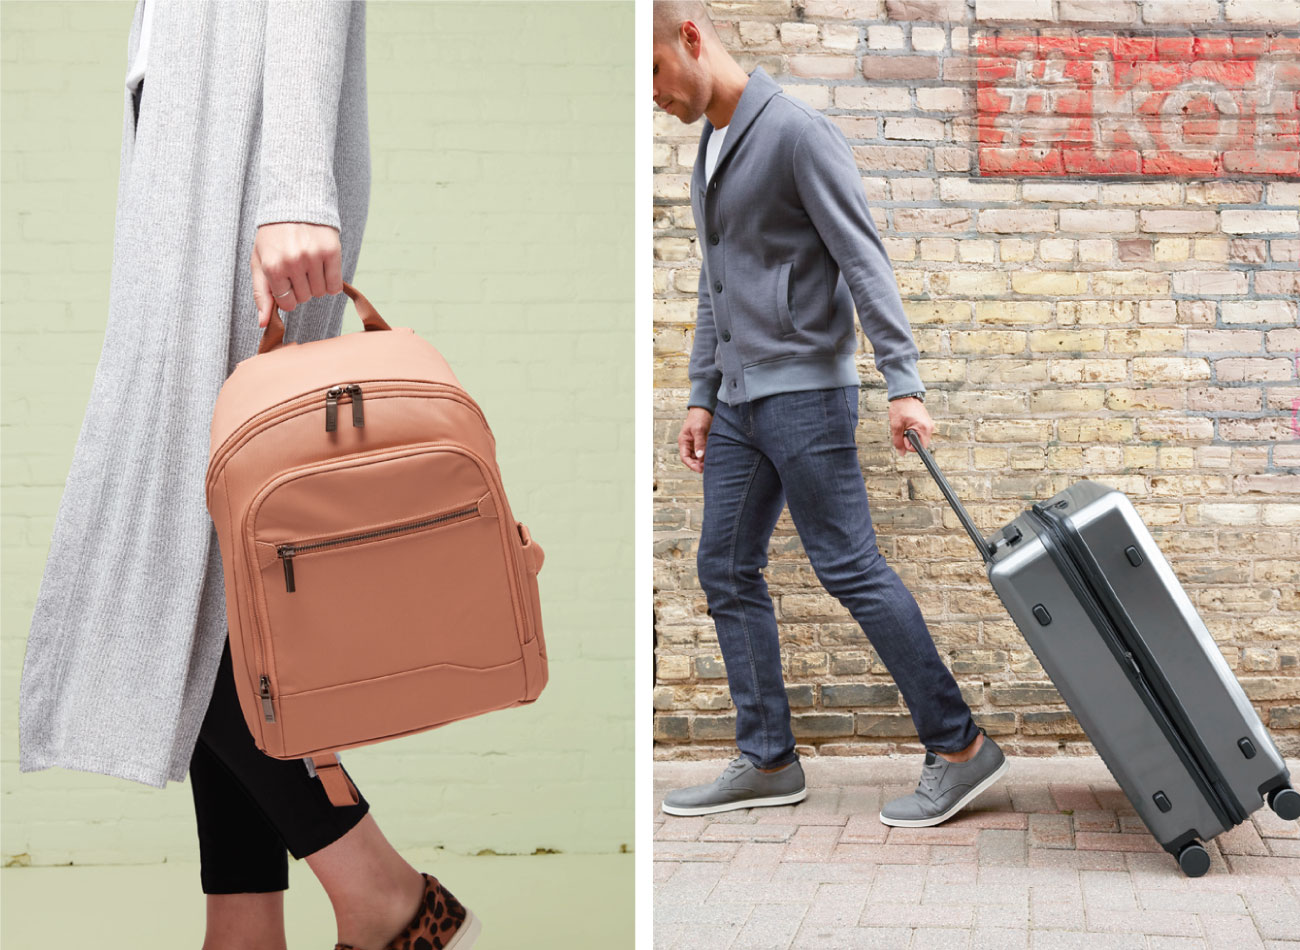 Left, a model carries a medium cedar backpack; right, a model pulling a large silver rolling bag